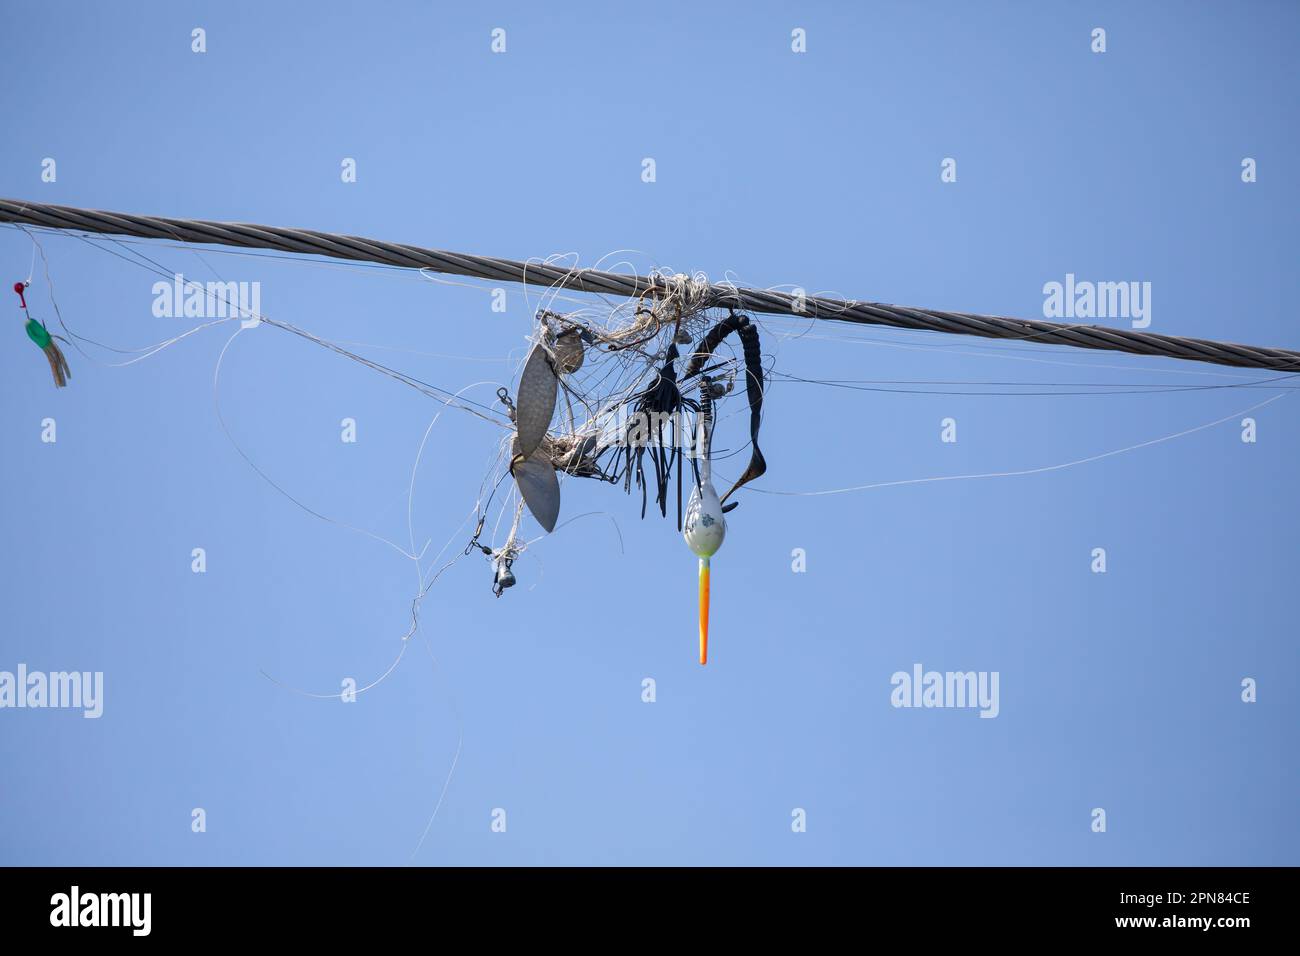 https://c8.alamy.com/comp/2PN84CE/tangled-fishing-line-and-lures-wrapped-around-overhead-wires-against-a-blue-sky-near-a-river-2PN84CE.jpg